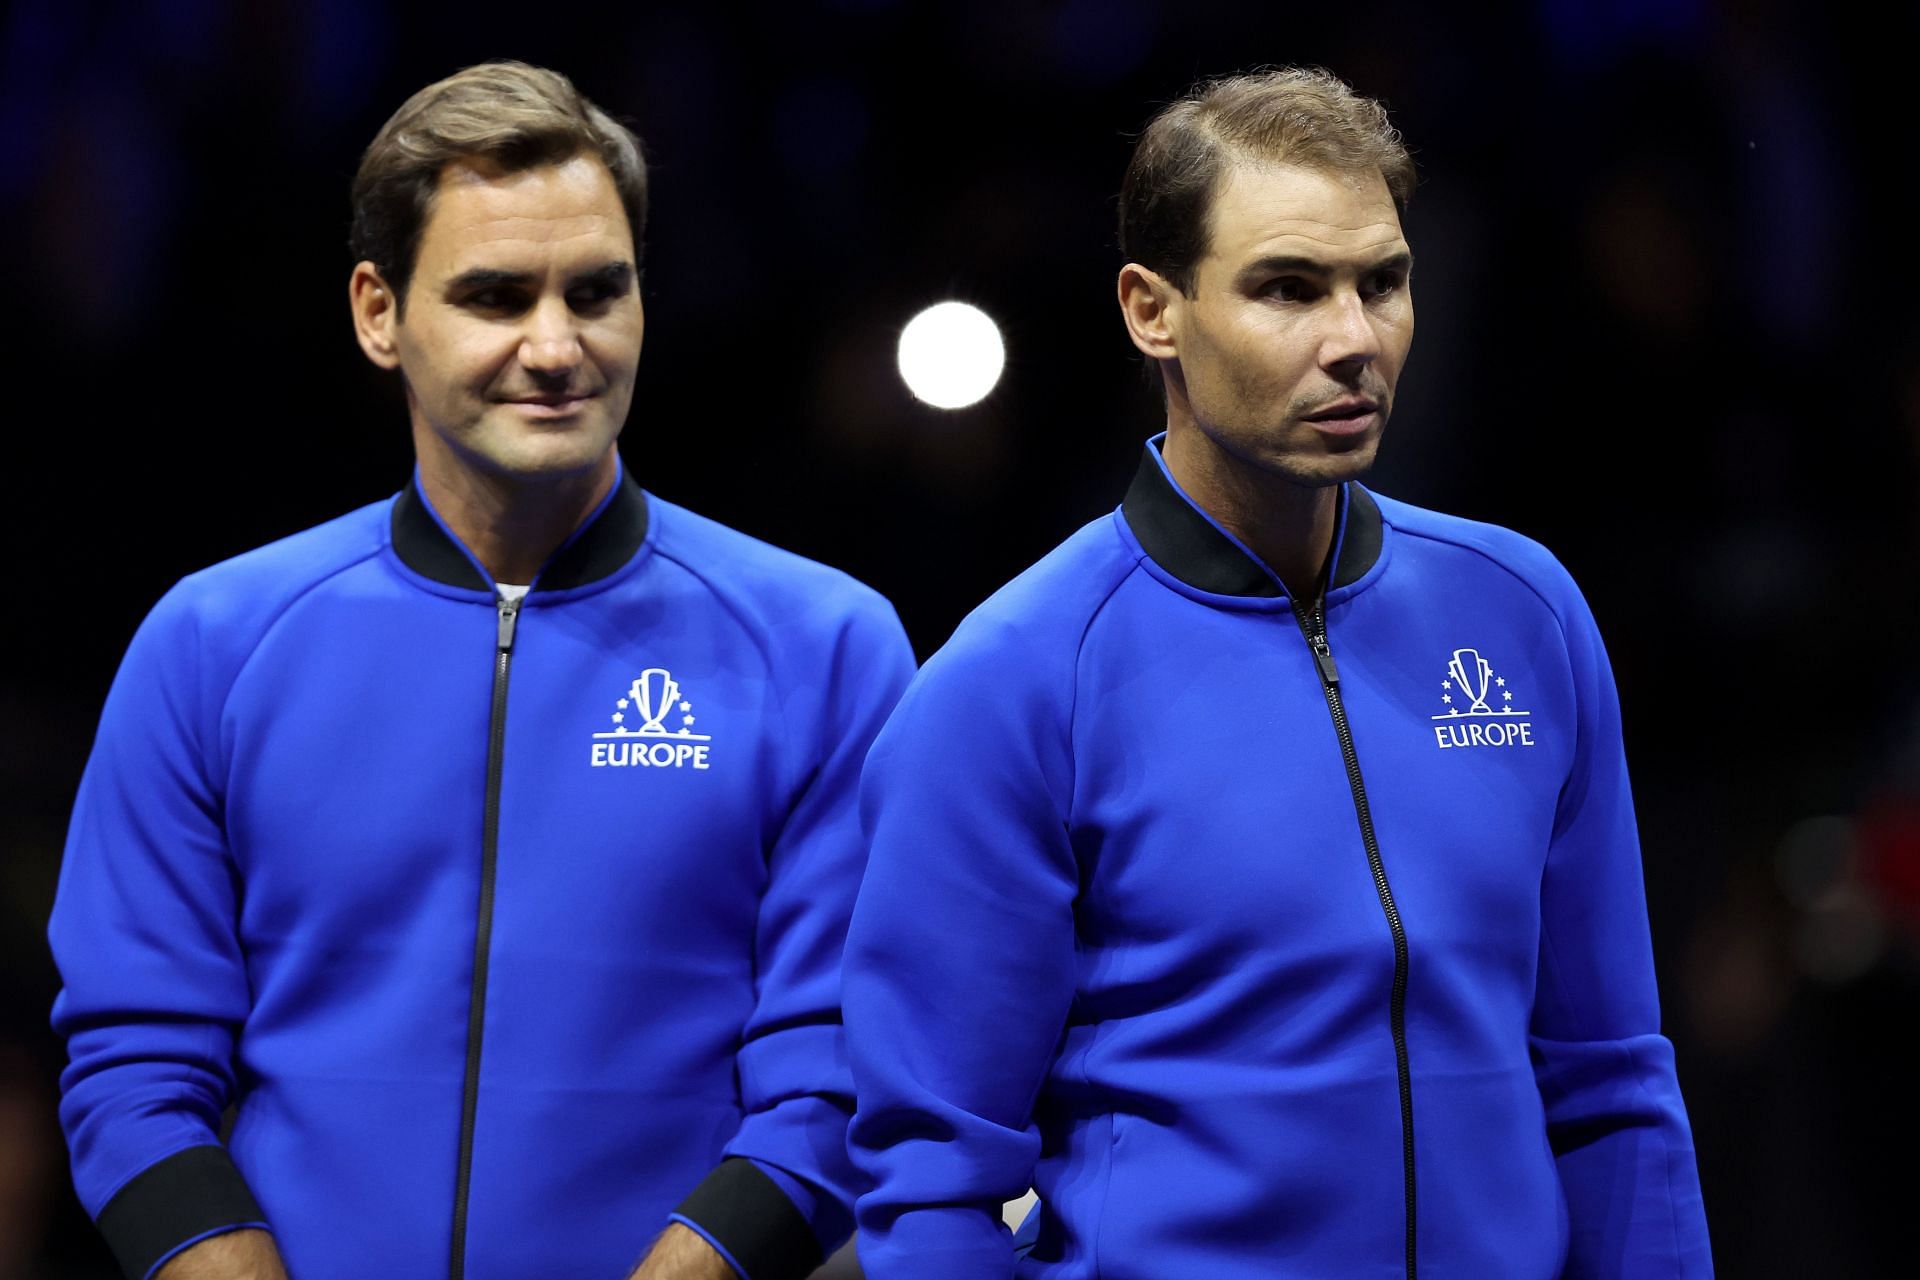 Roger Federer and Rafael Nadal will team up for a doubles match at the 2022 Laver Cup.